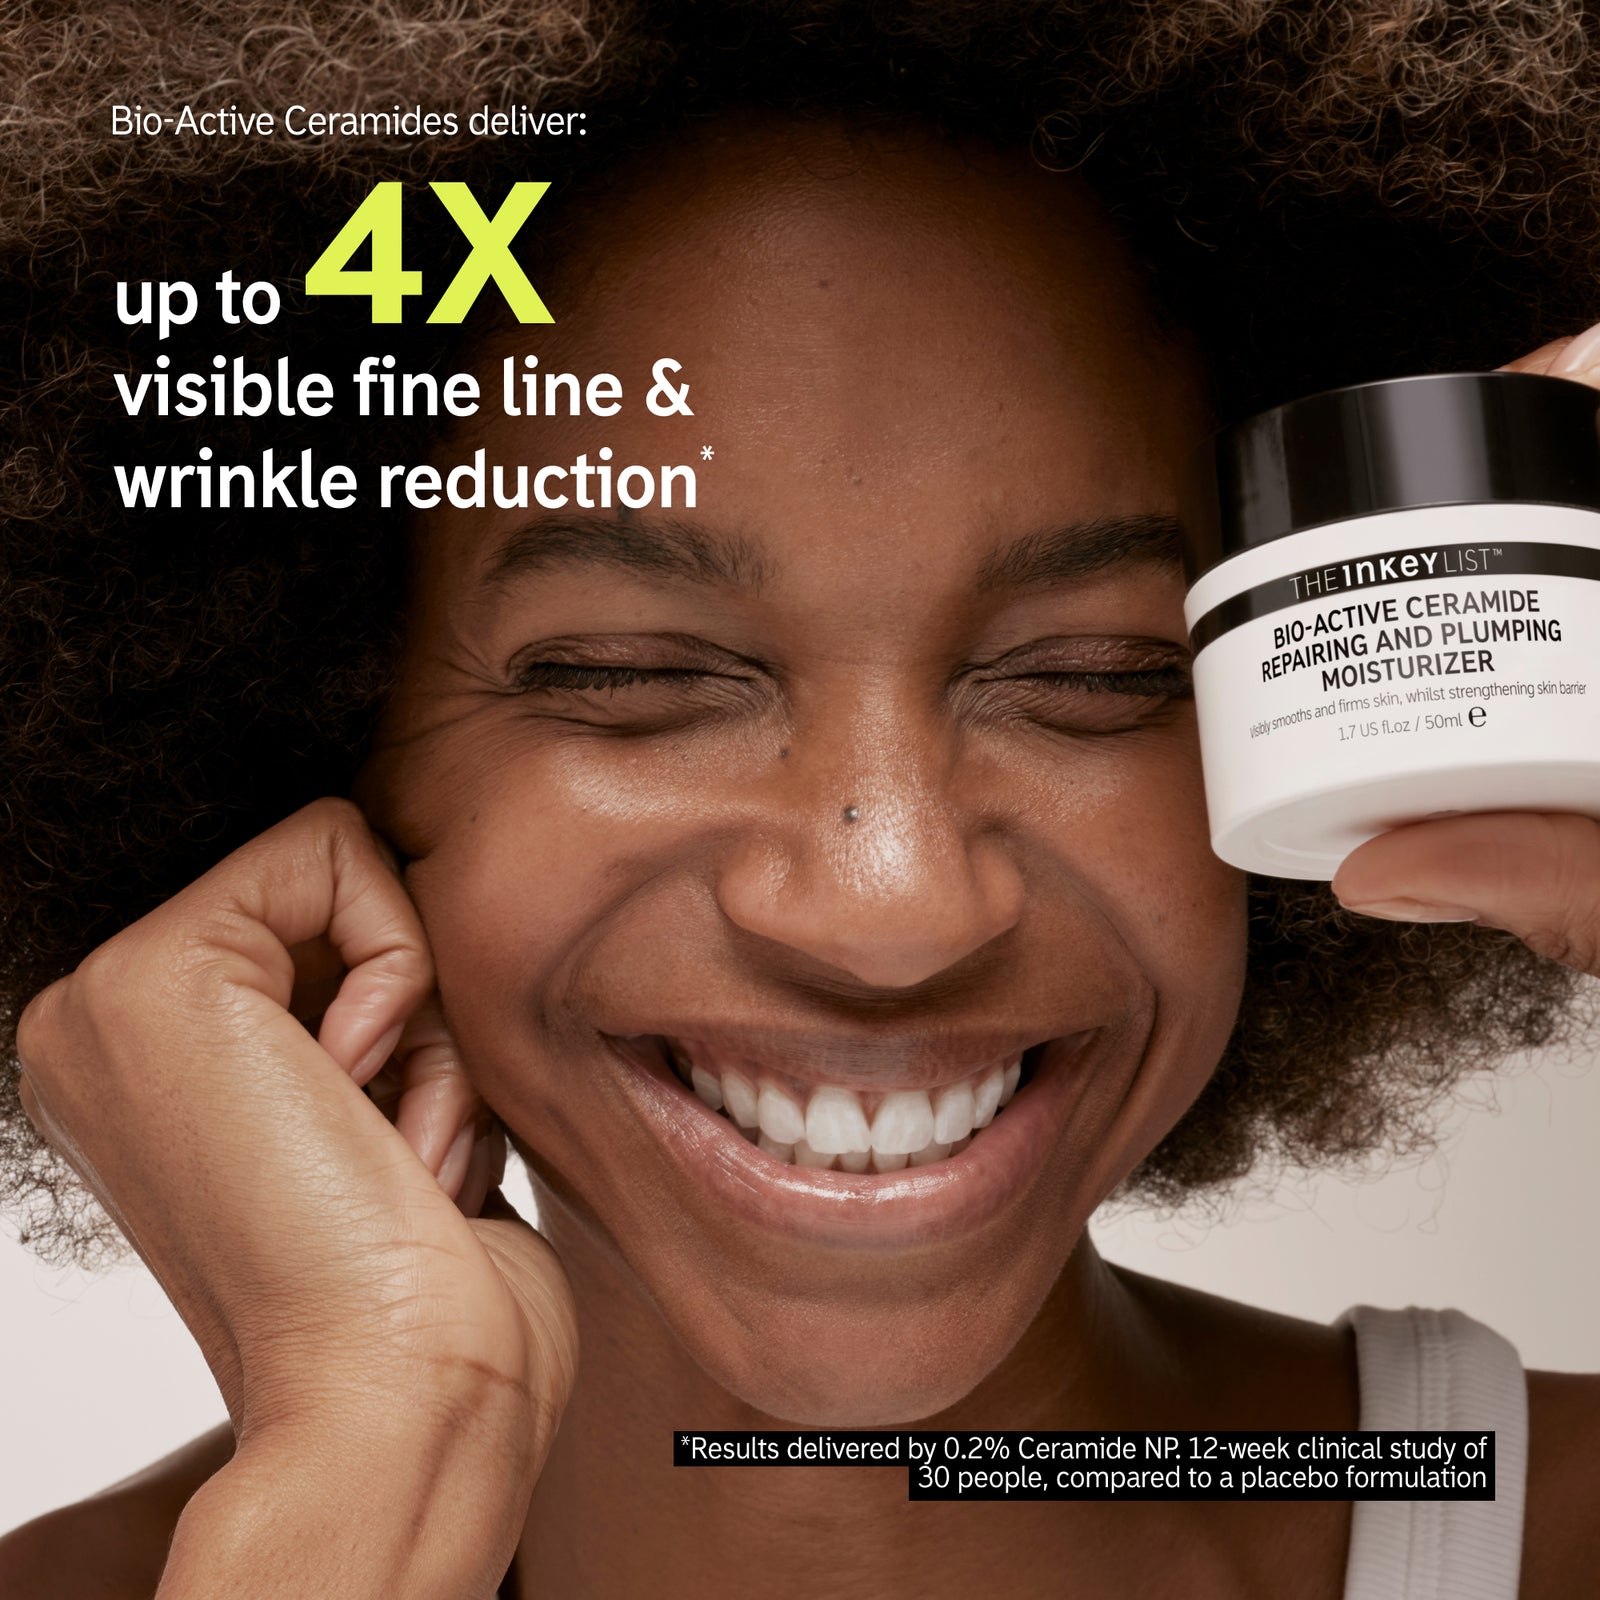 Up to 4x visable fine line and wrinkle reduction*